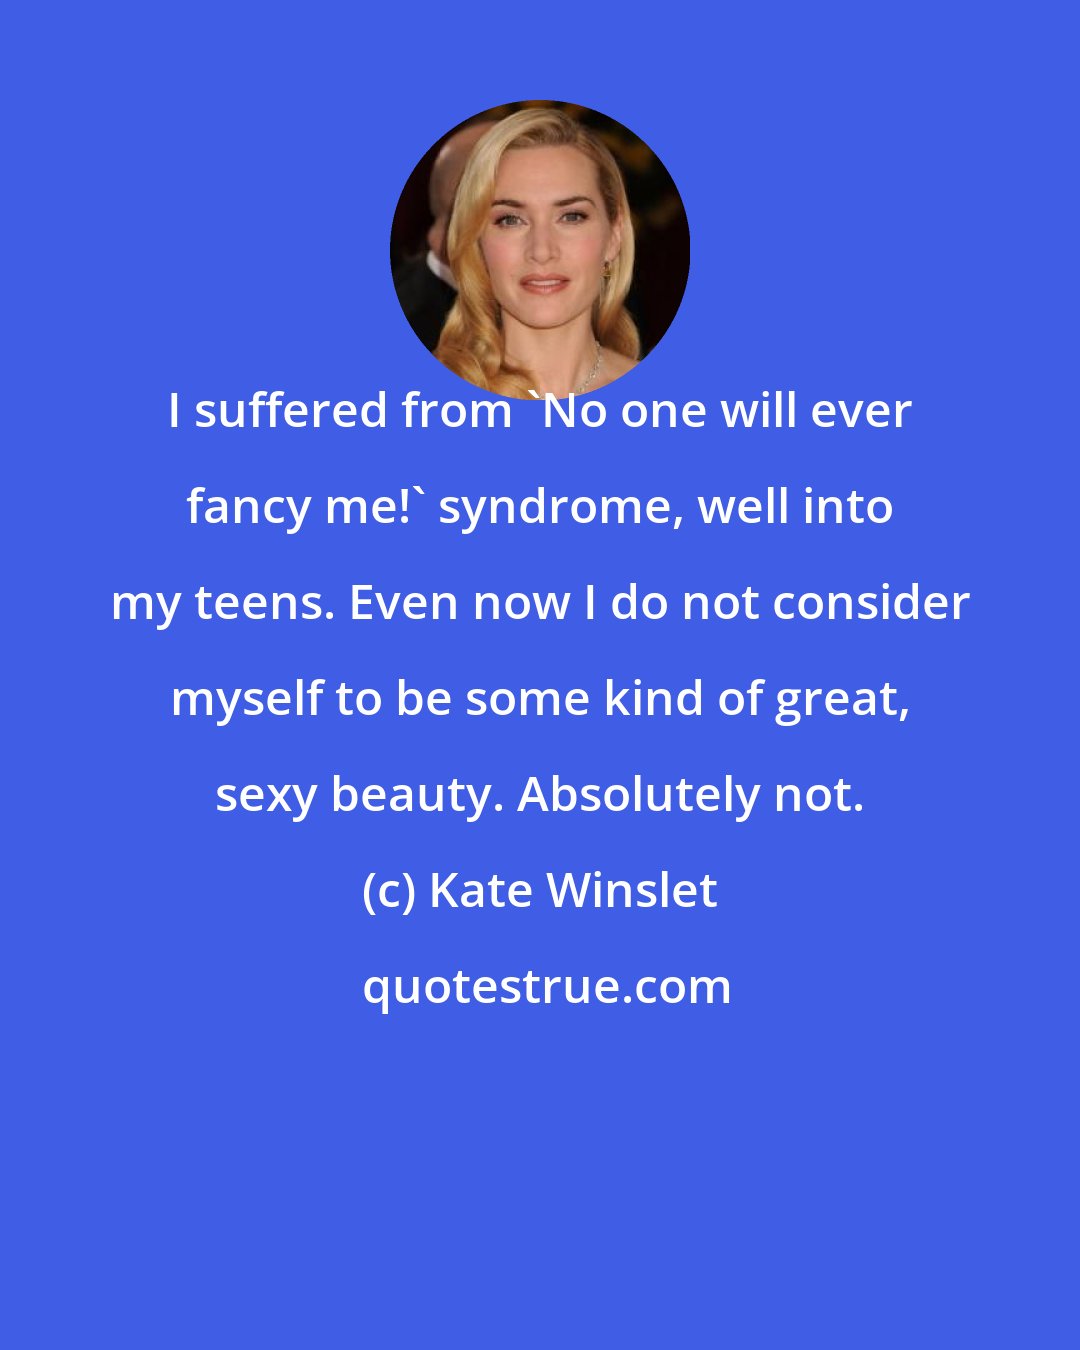 Kate Winslet: I suffered from 'No one will ever fancy me!' syndrome, well into my teens. Even now I do not consider myself to be some kind of great, sexy beauty. Absolutely not.